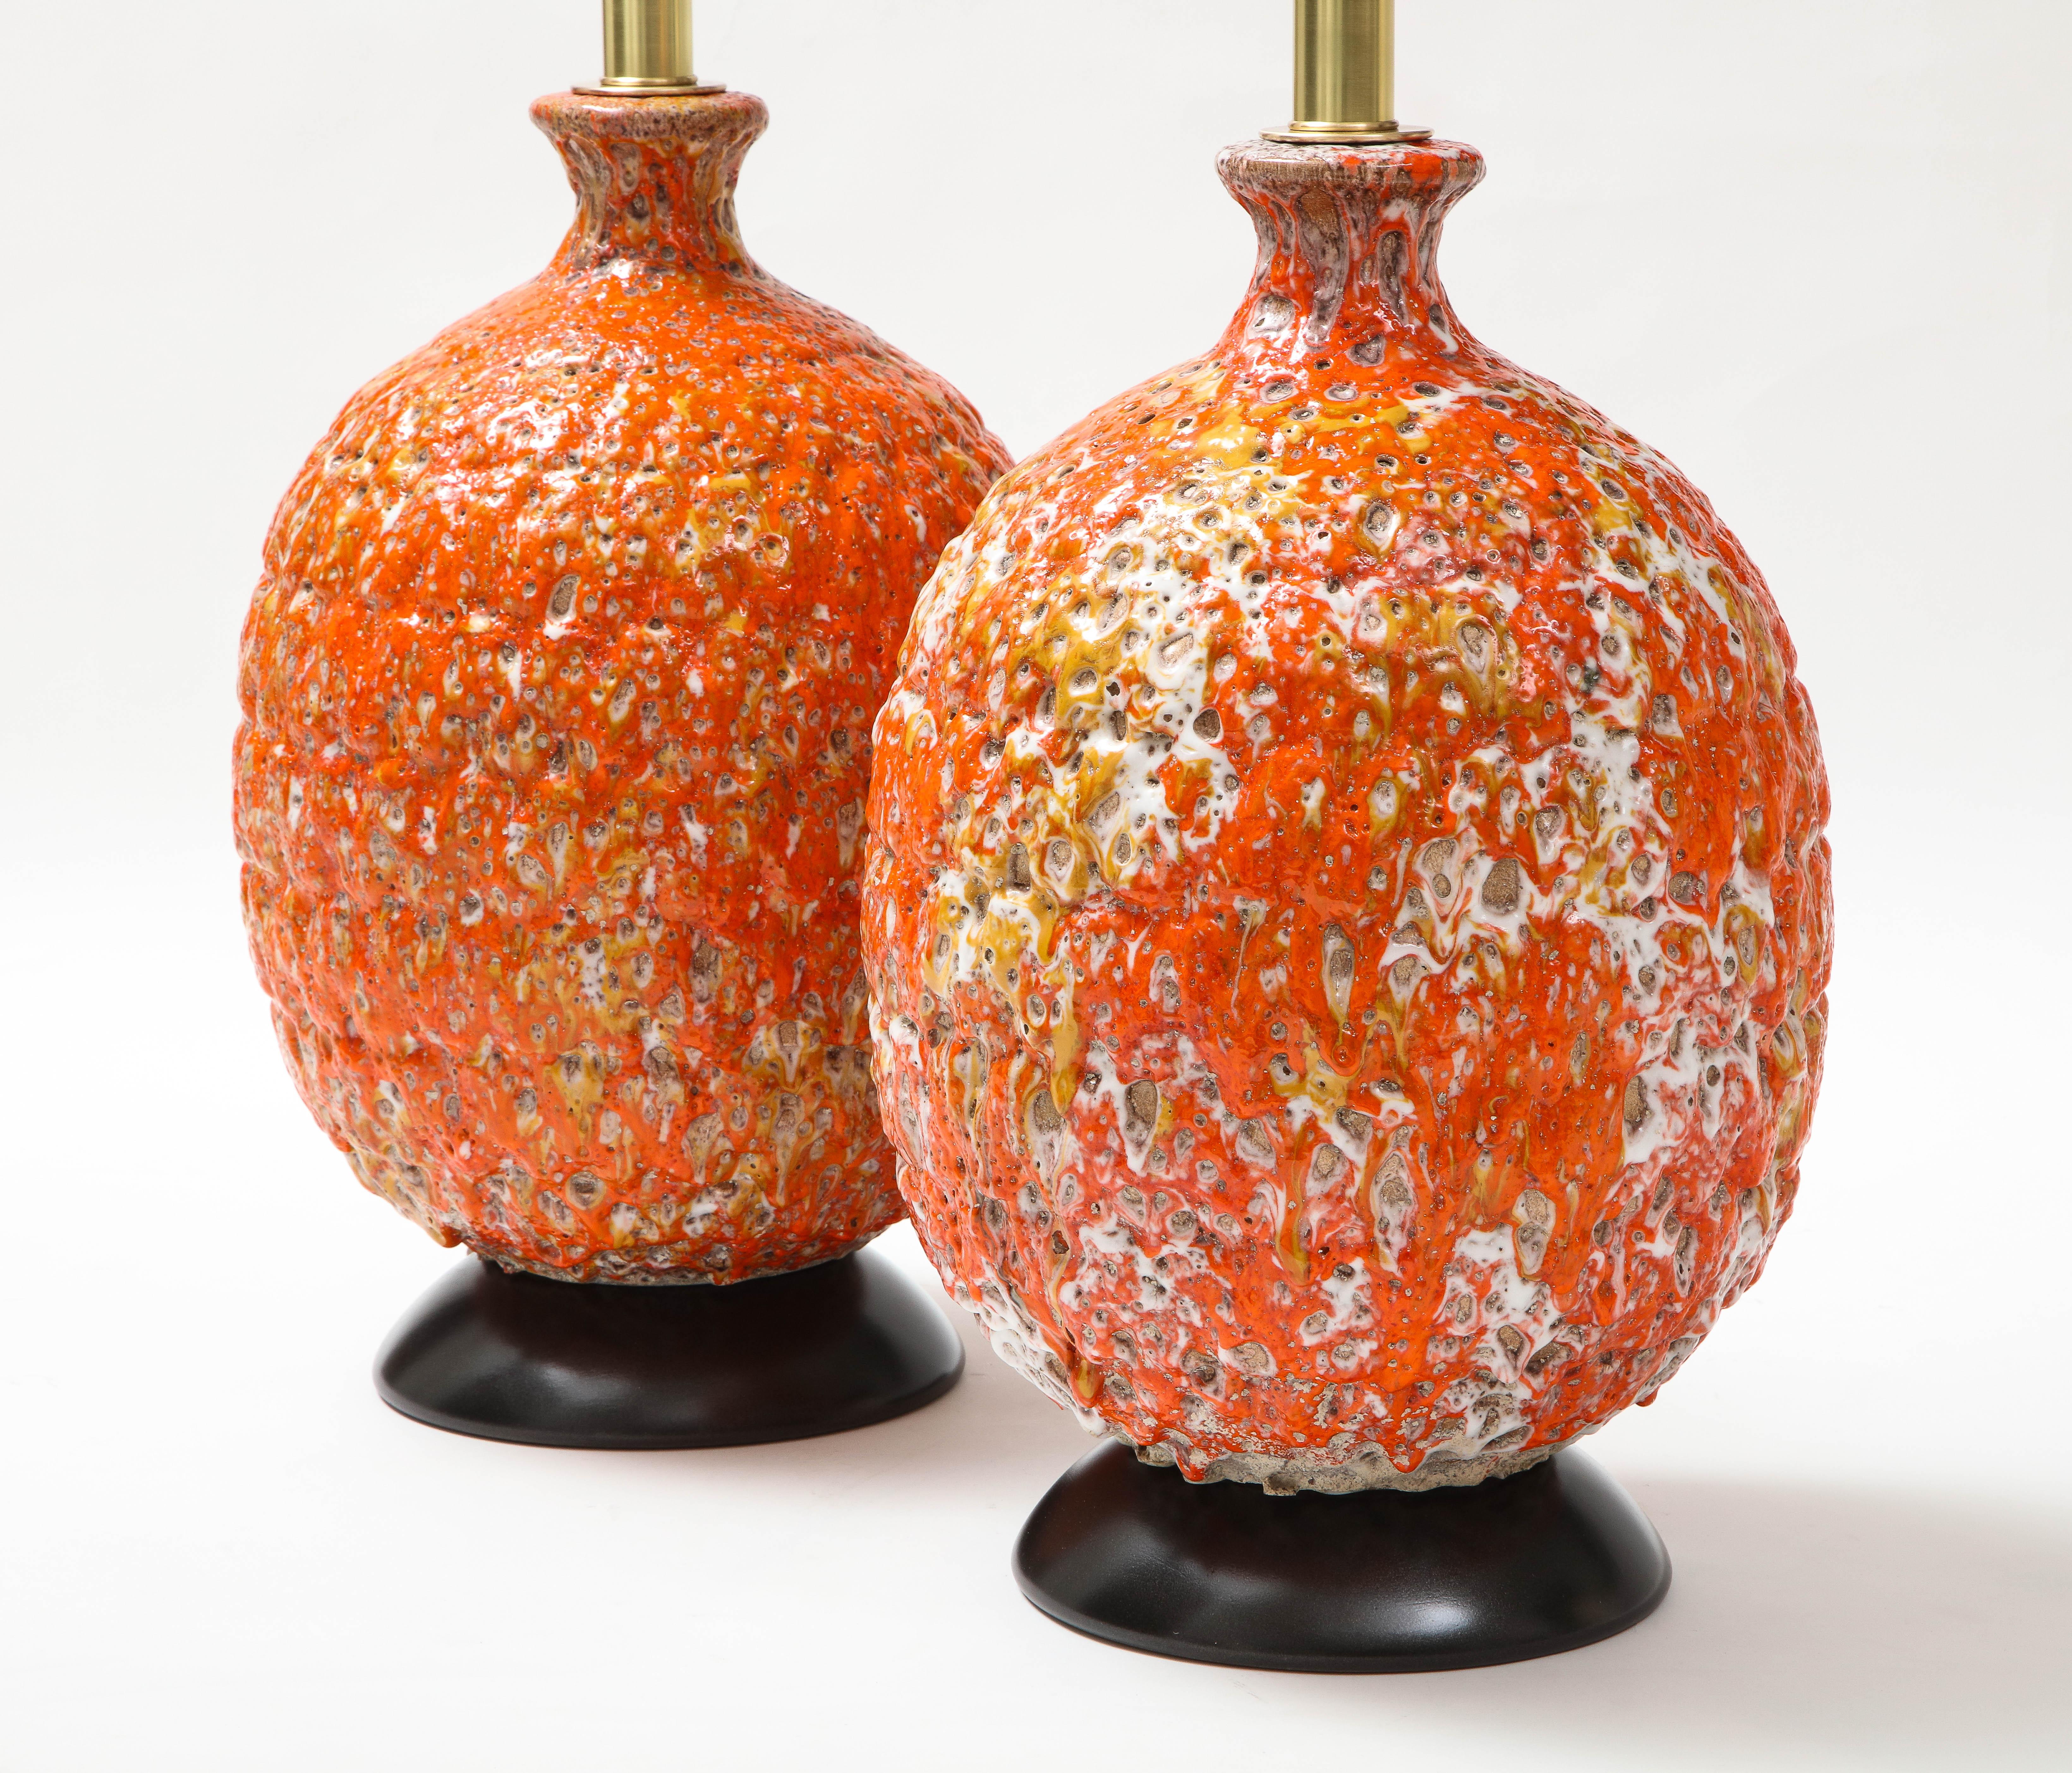 Pair of Giant Italian Volcanic Glazed Ceramic Lamps In Good Condition For Sale In New York, NY